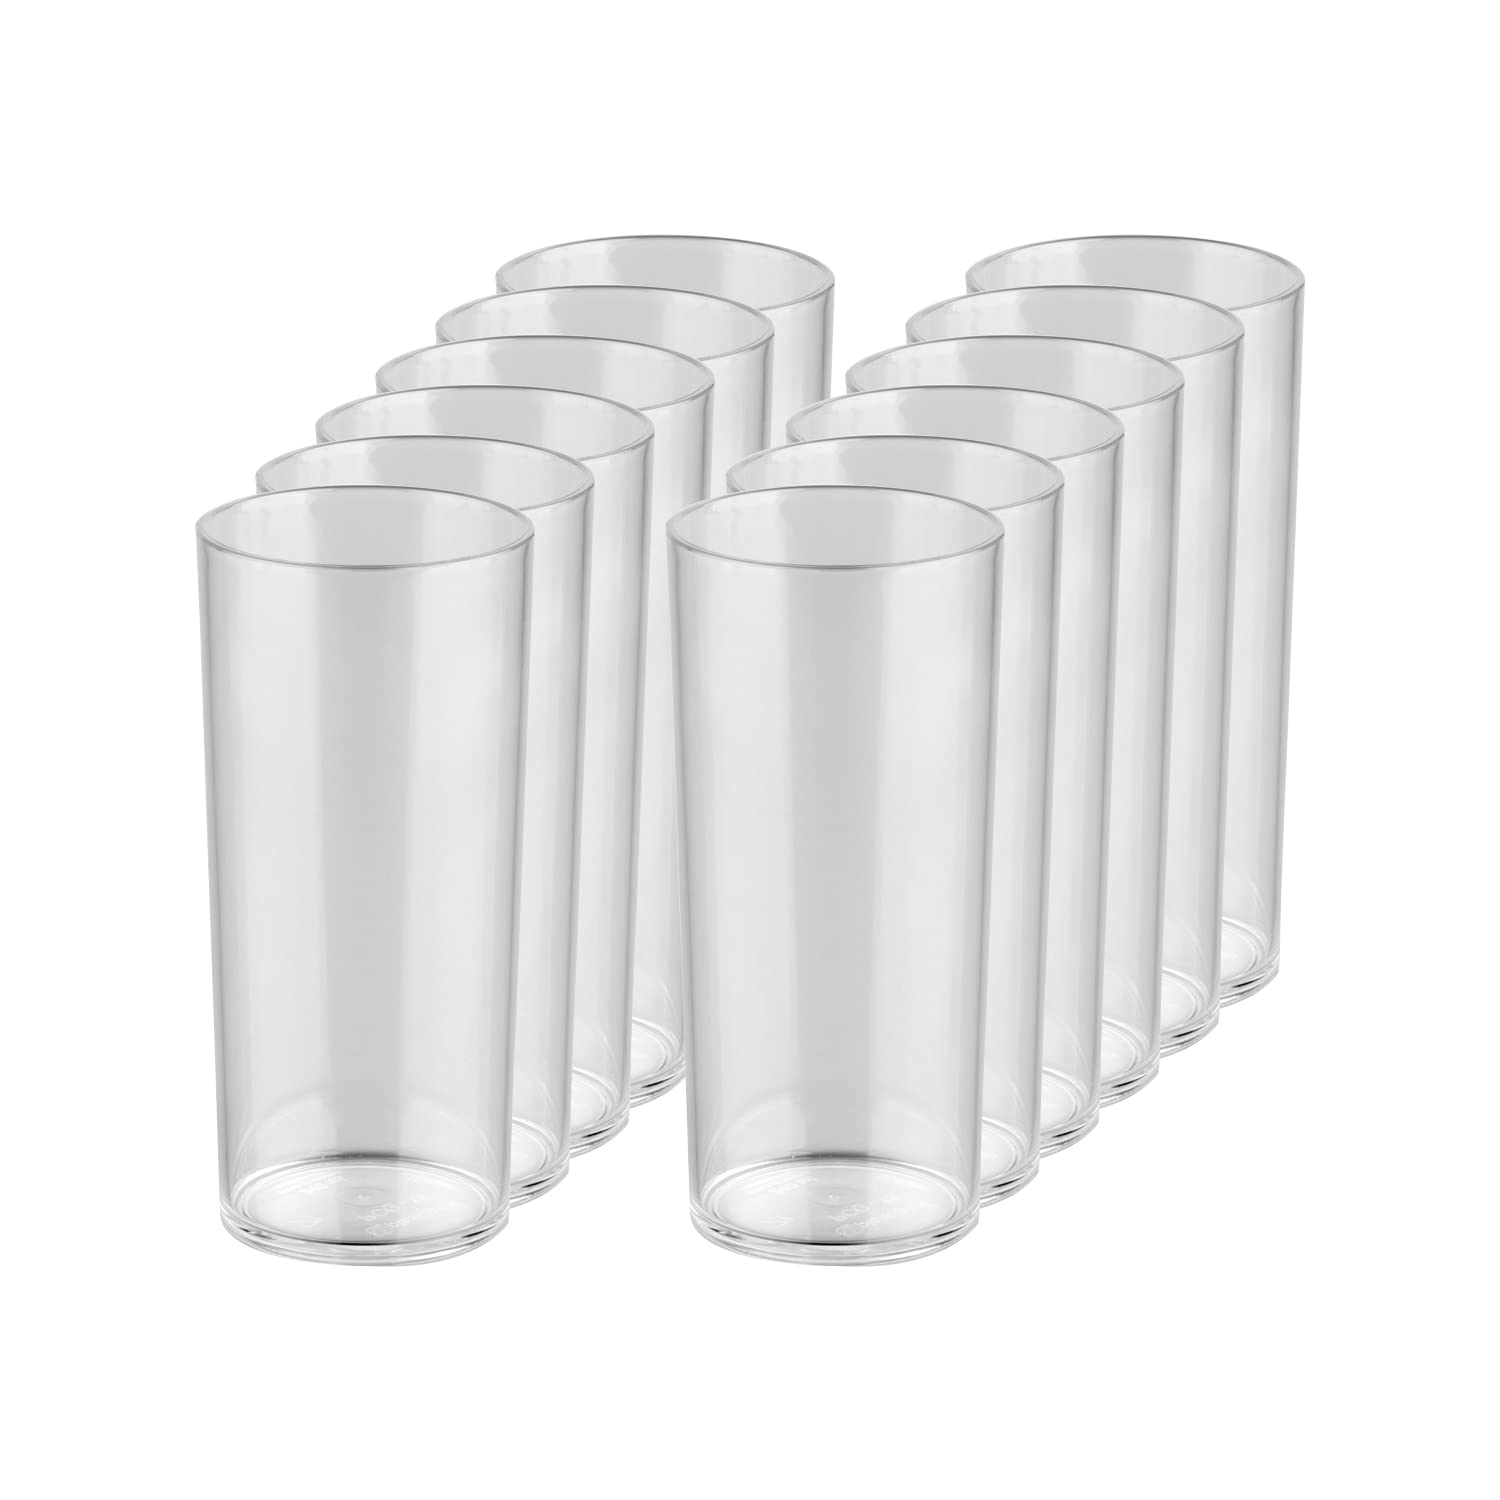 Premium Quality Plastic Drinking 8.1-ounce Glasses, Clear, Unbreakable Polycarbonate Highball Tumblers for Water, Juice, Cocktails, Dishwasher Safe, Tall for Indoor Outdoor Use, Reusable (Set of 12)